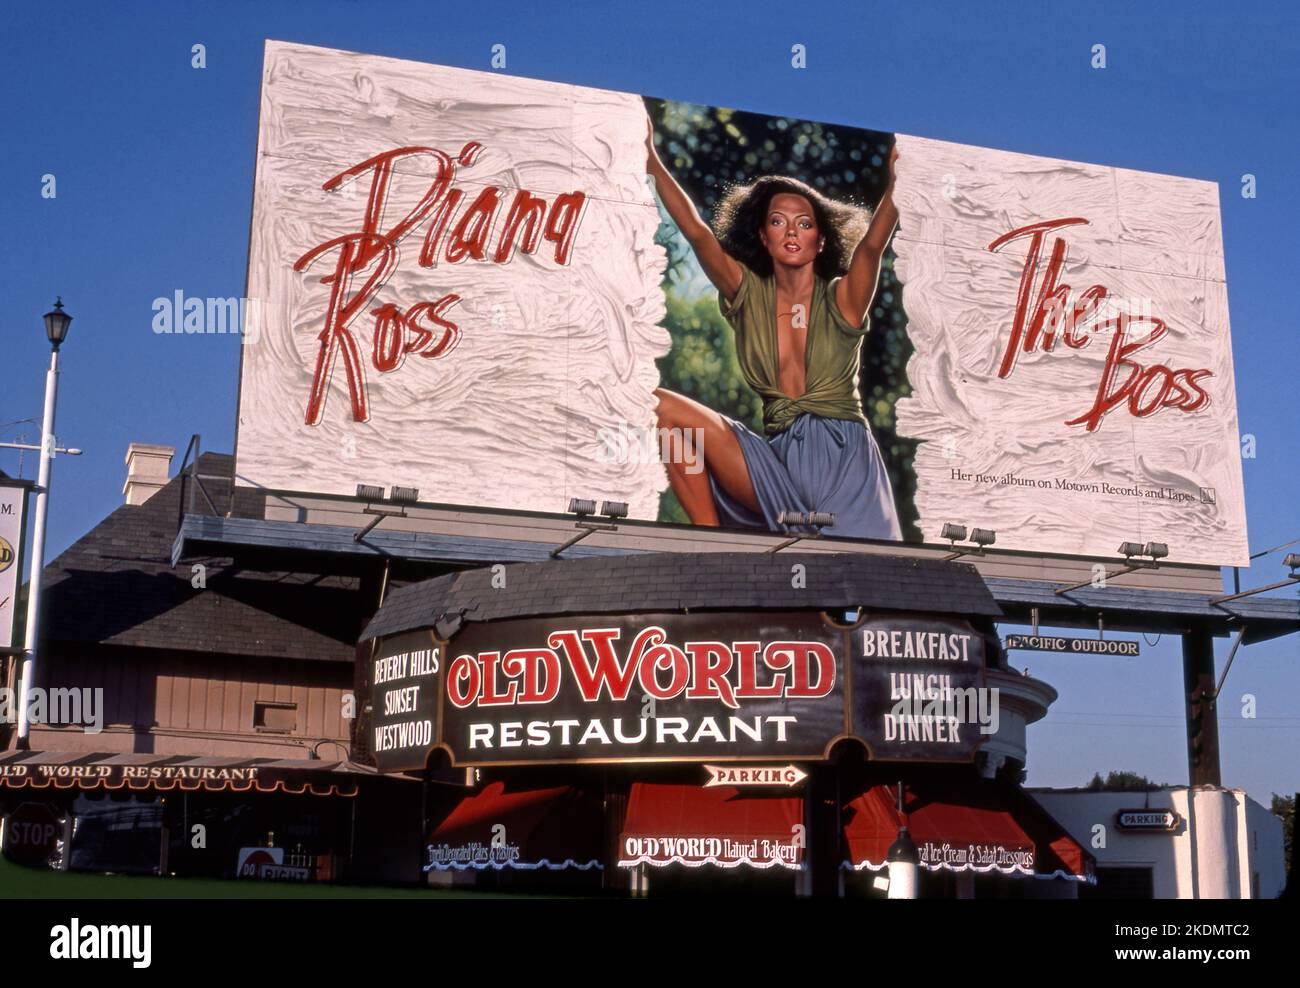 A hand-painted billboard promoting a record for Diana Ross titled The Boss on top of the Old World Restaurant on the Sunset Stirp in Los Angeles, CA Stock Photo